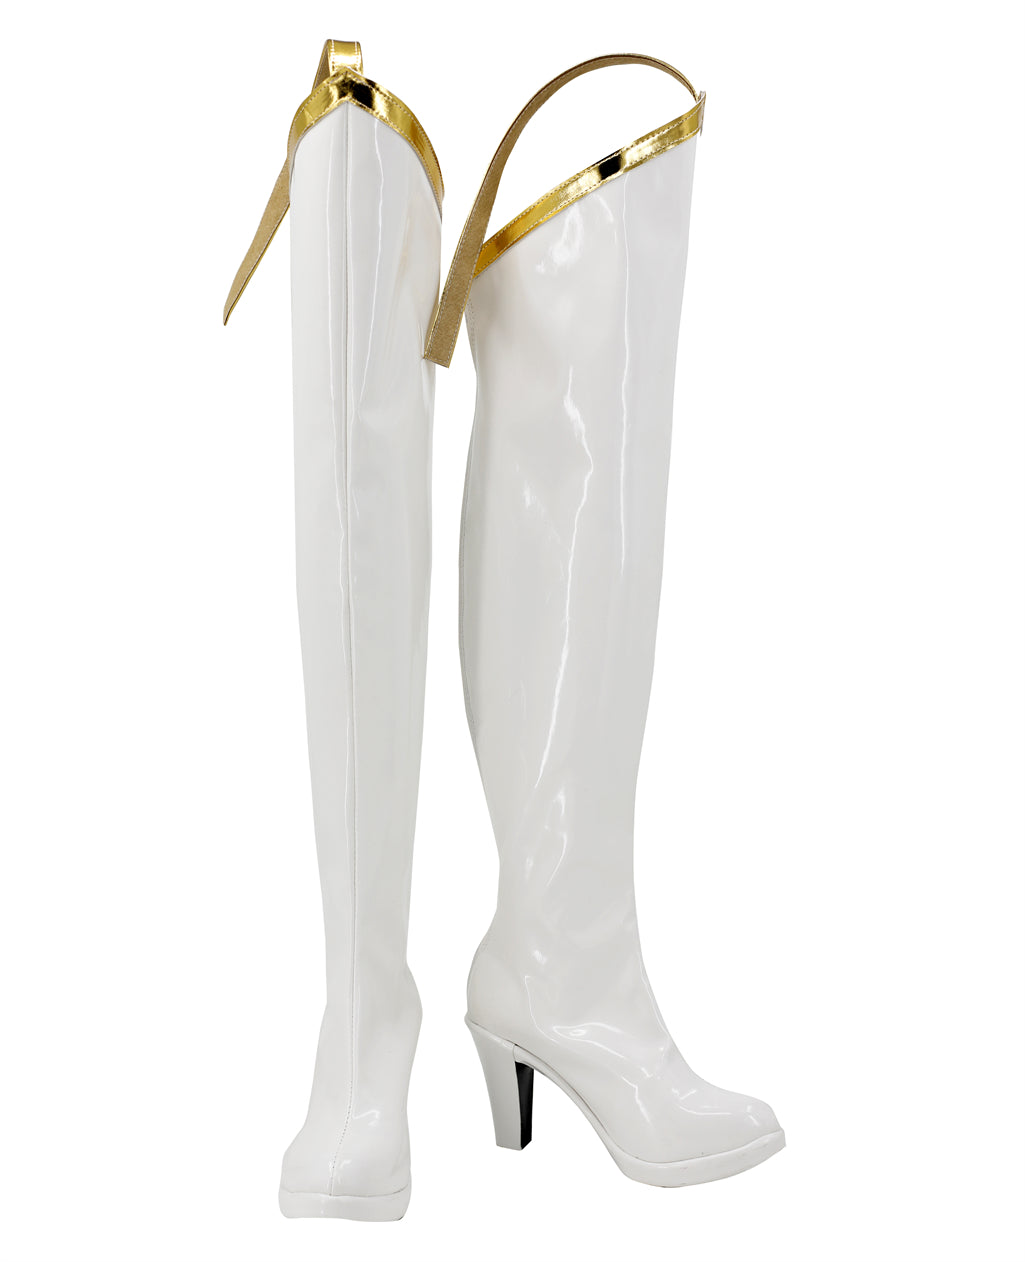 SBluuCosplay Code Geass Lelouch of the Rebellion C.C. Cosplay Shoes Boots